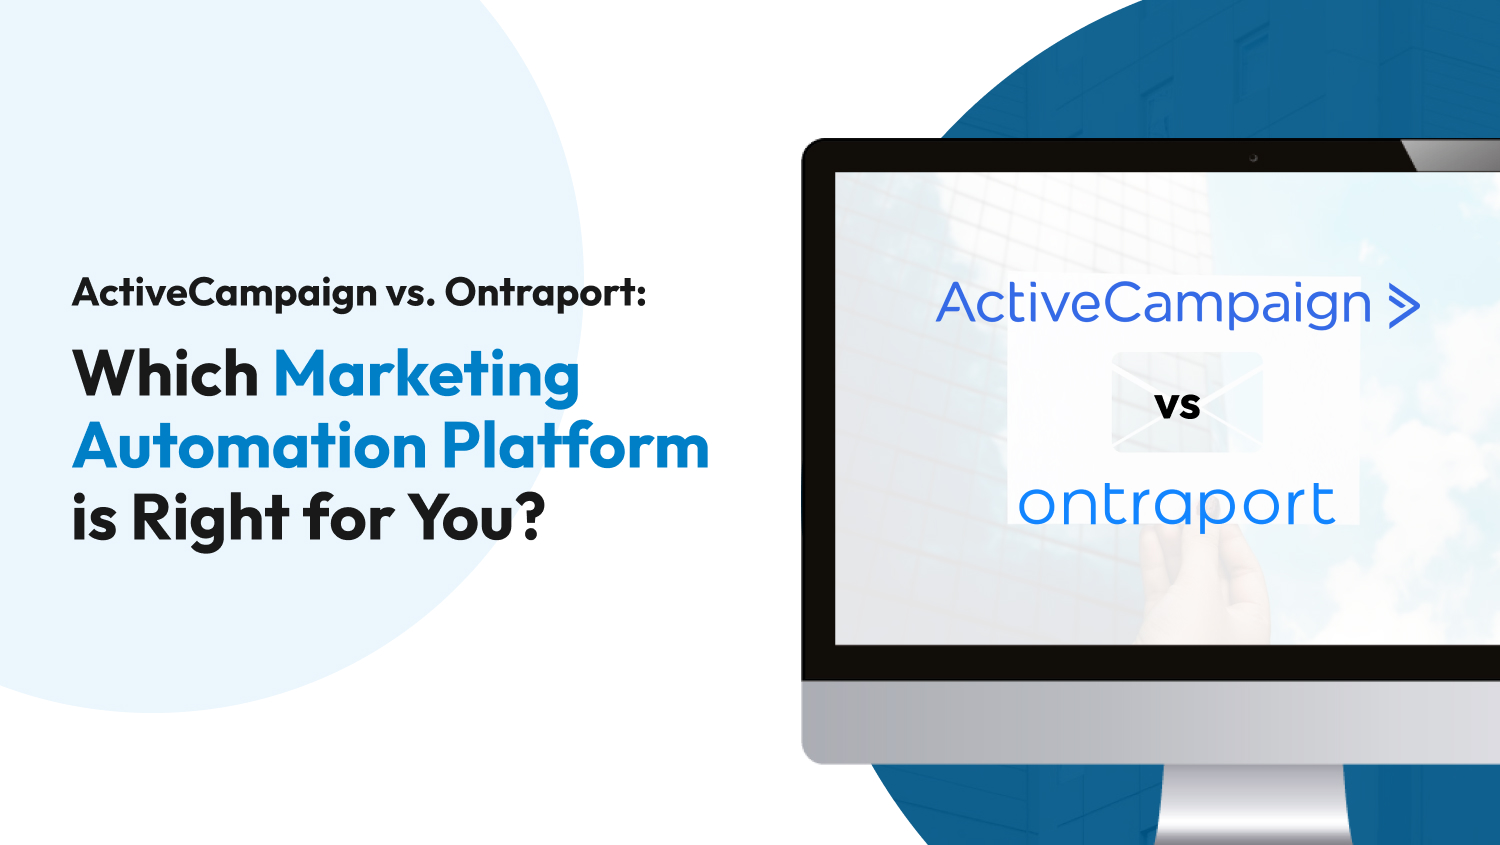 ActiveCampaign vs. Ontraport: Which Marketing Automation Platform is Right for You?